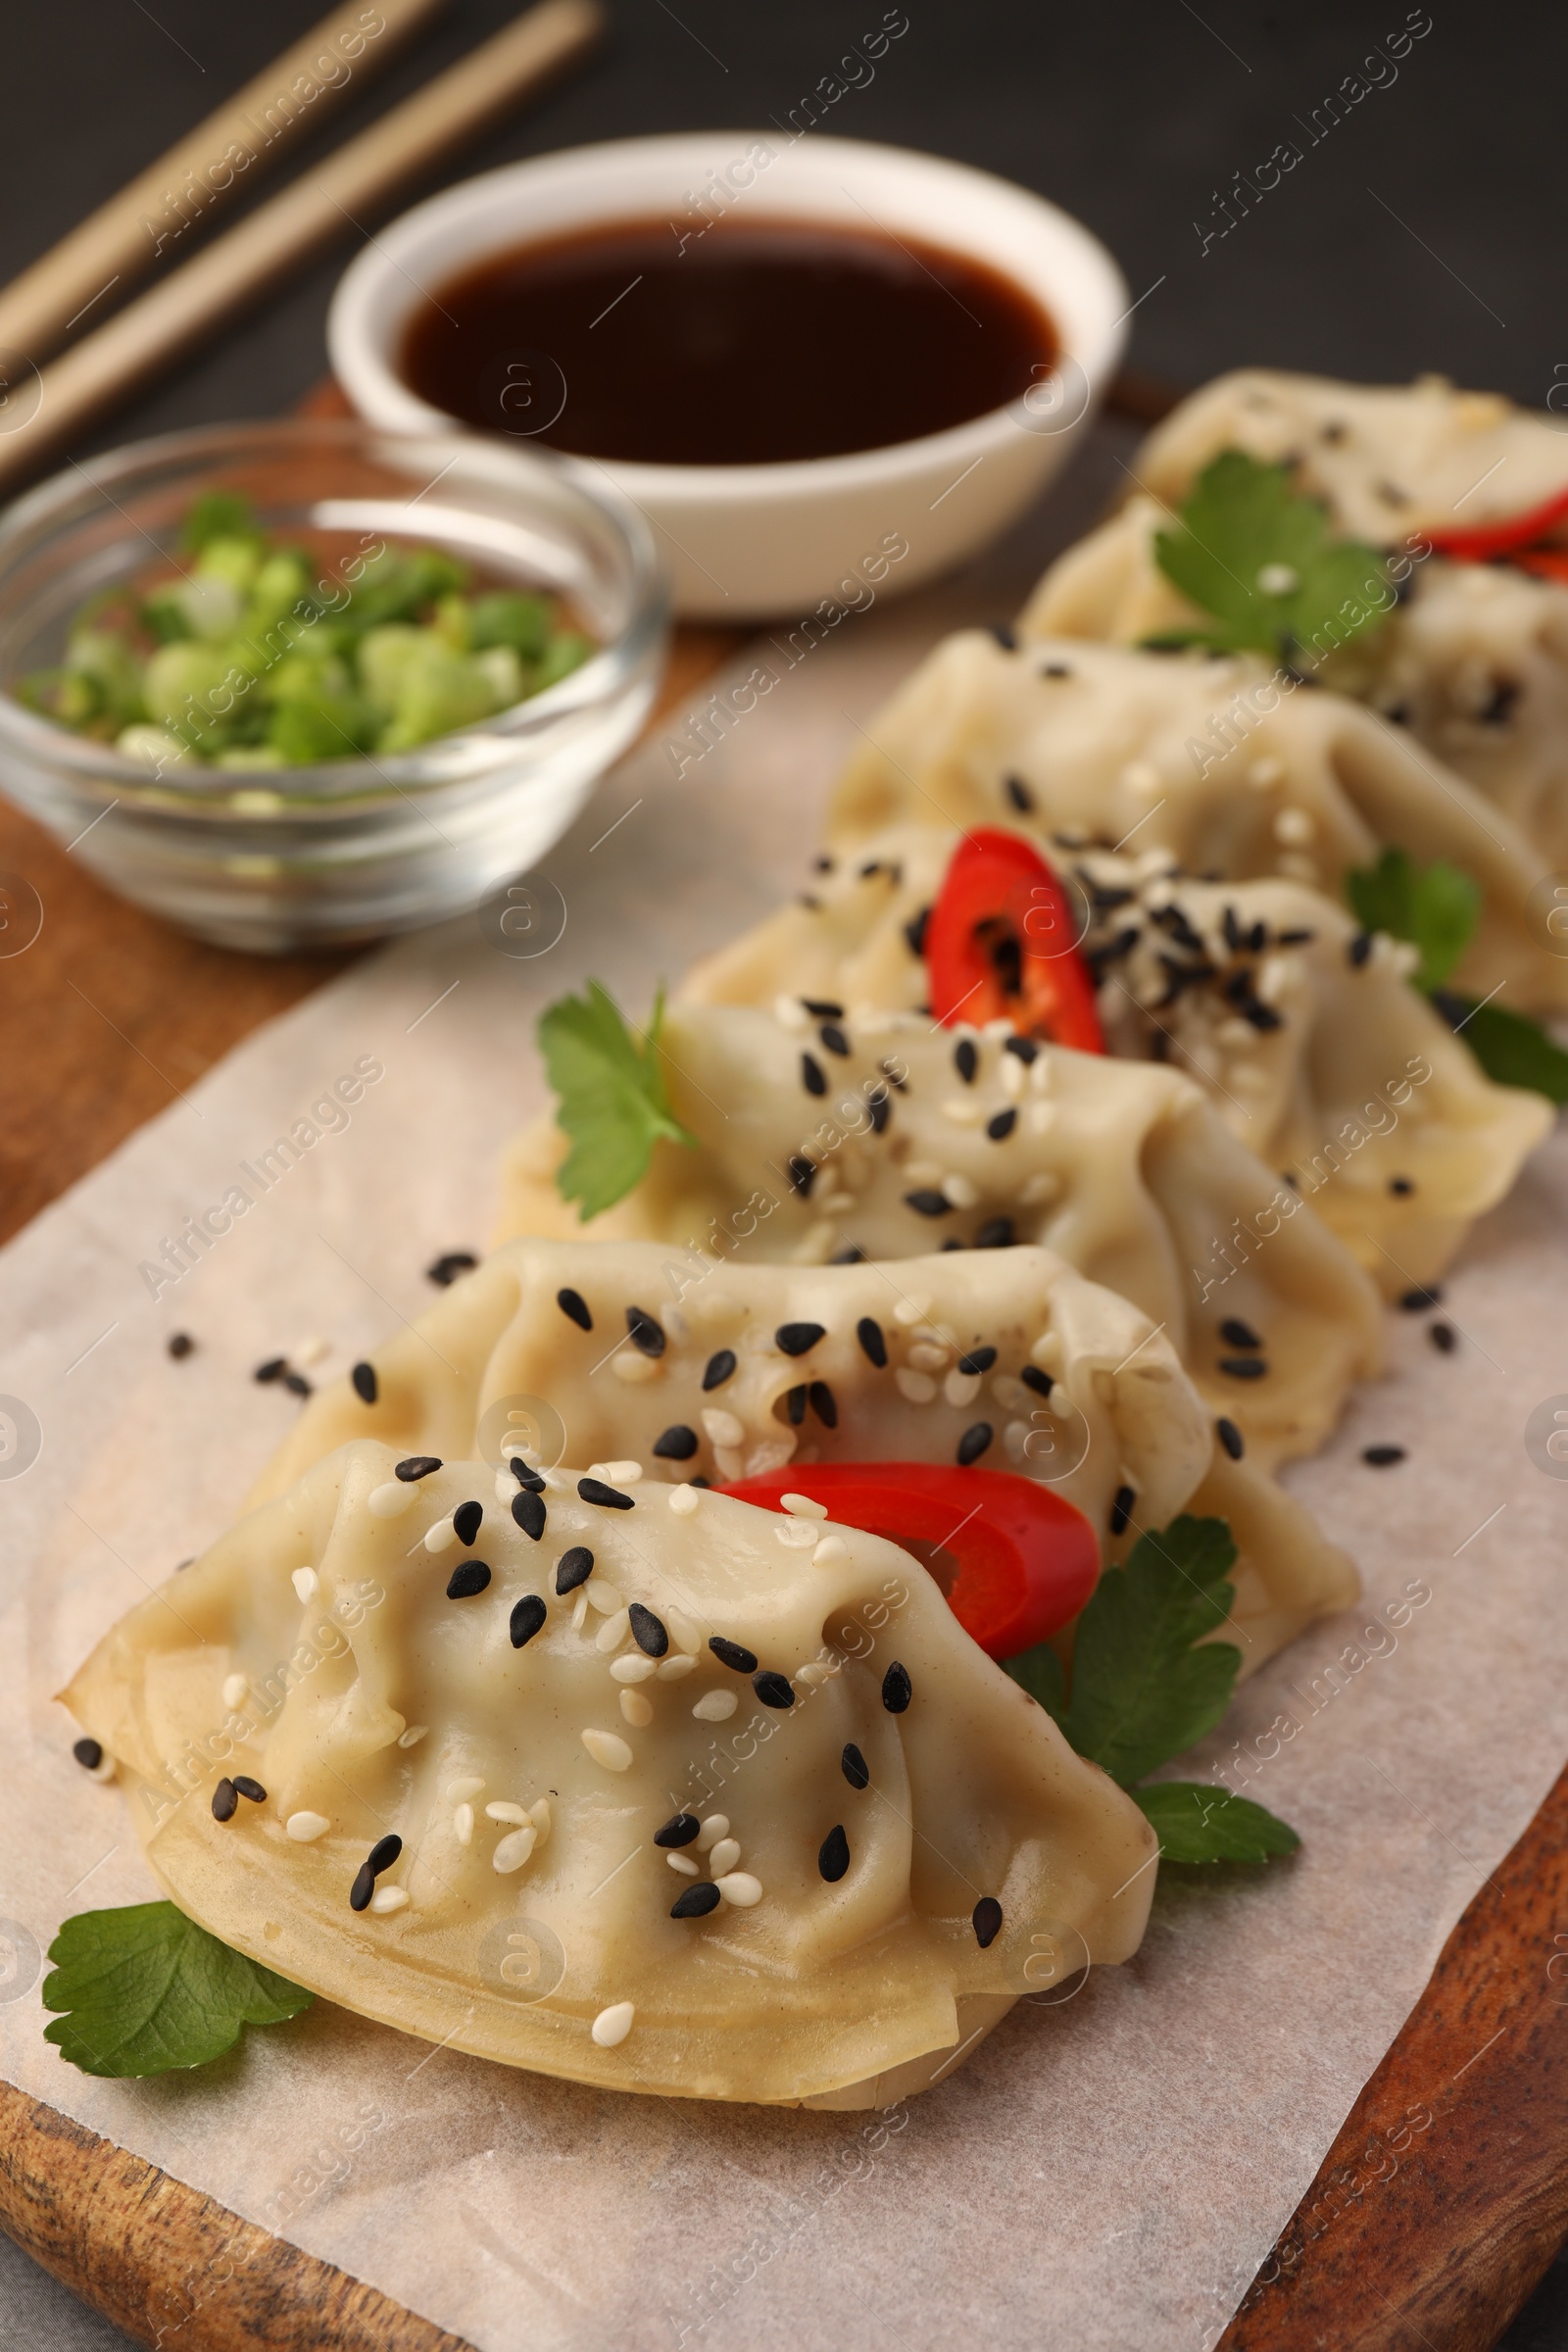 Photo of Delicious gyoza (asian dumplings) with sesame seeds on wooden board